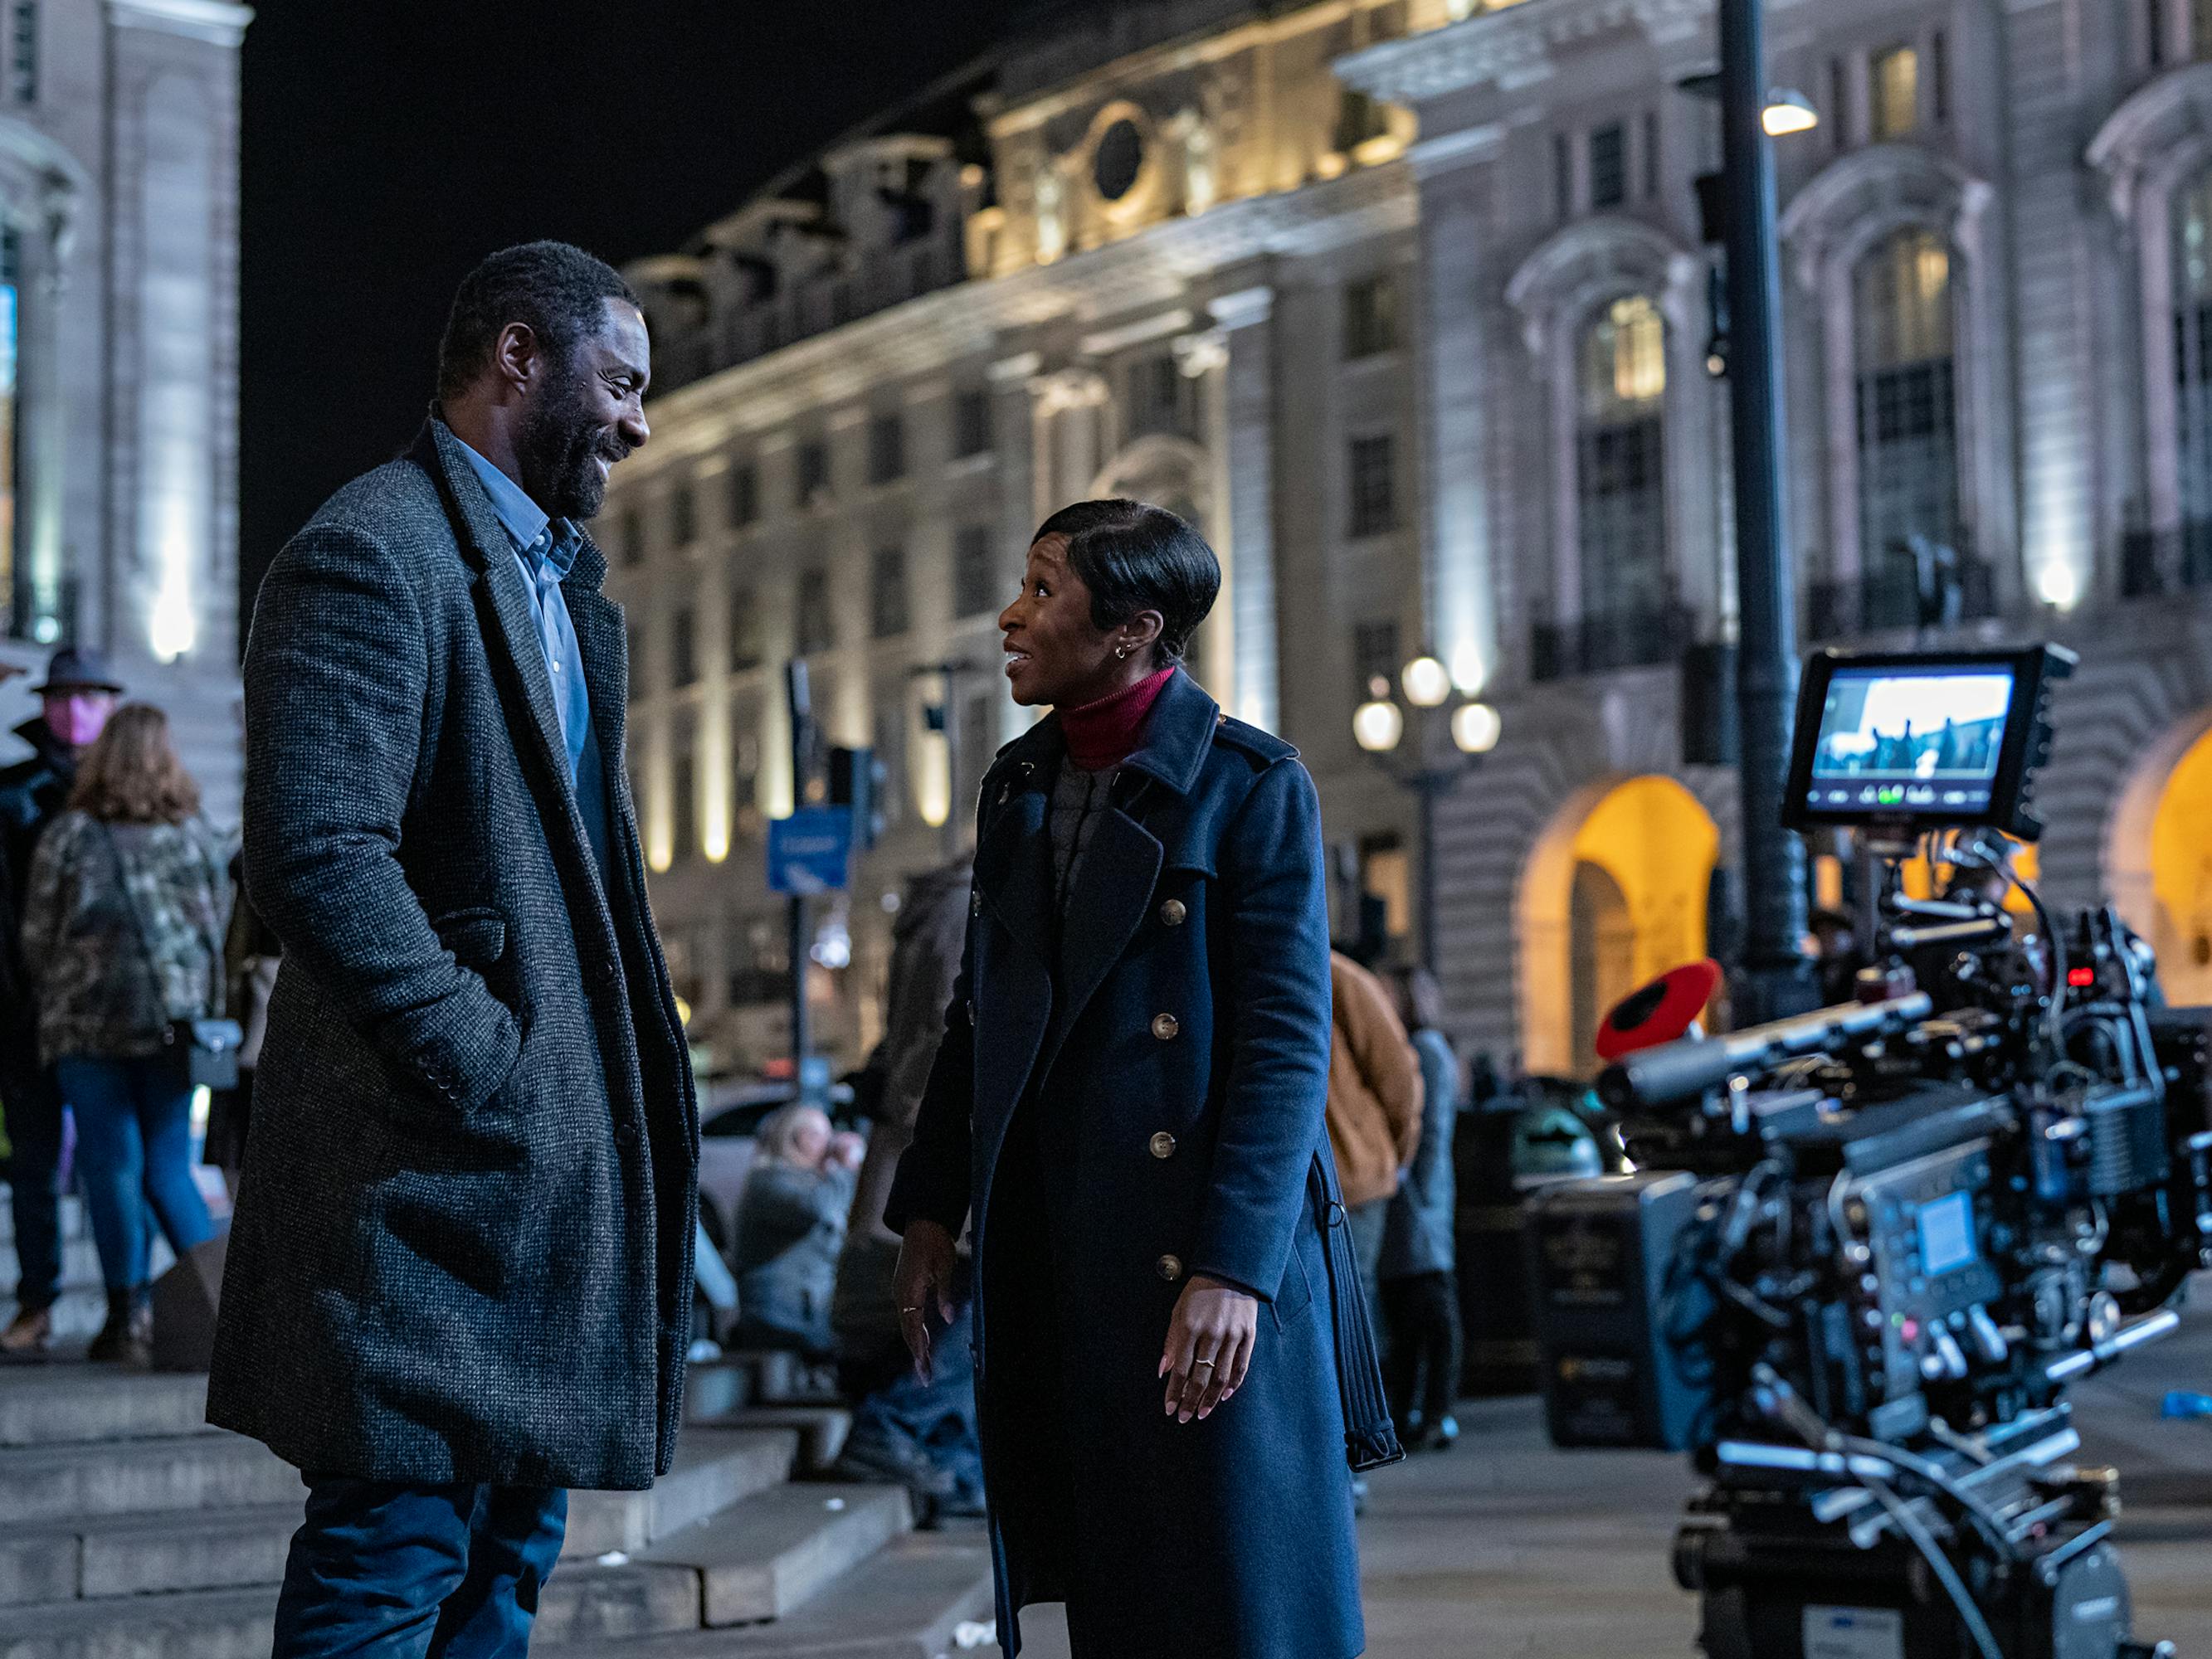 John Luther (Idris Elba) and Odette Raine (Cynthia Erivo) stand together behind the scenes. 